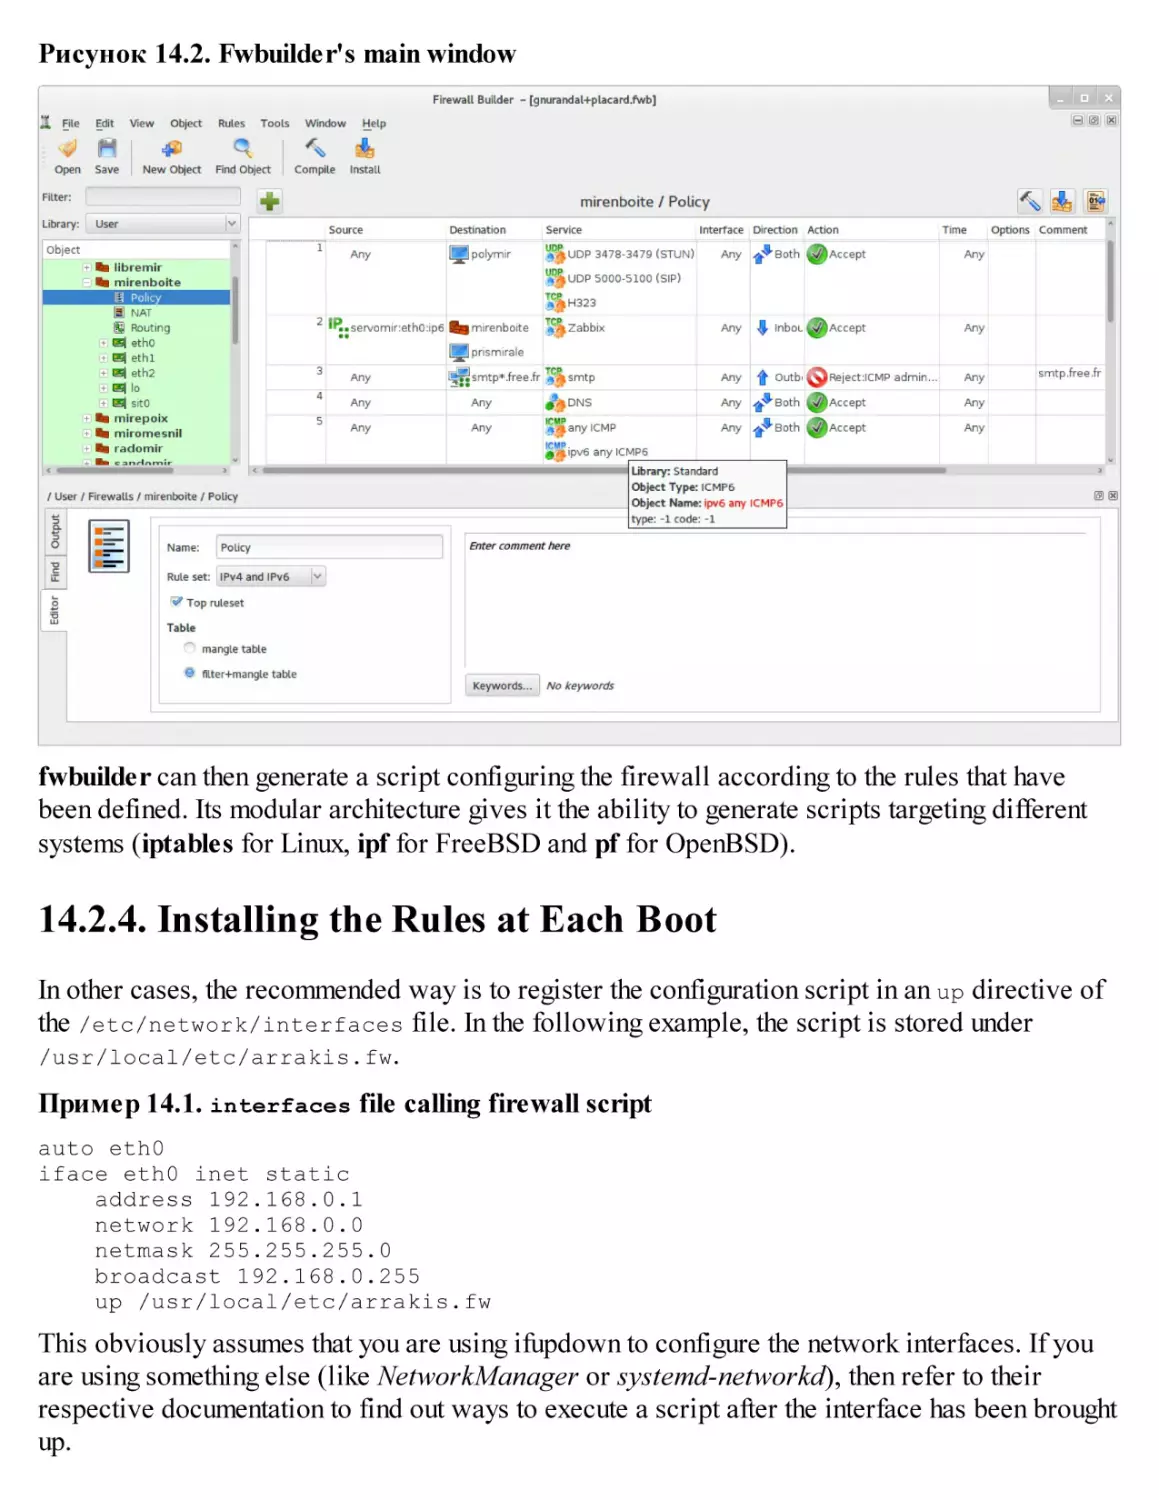 14.2.4. Installing the Rules at Each Boot